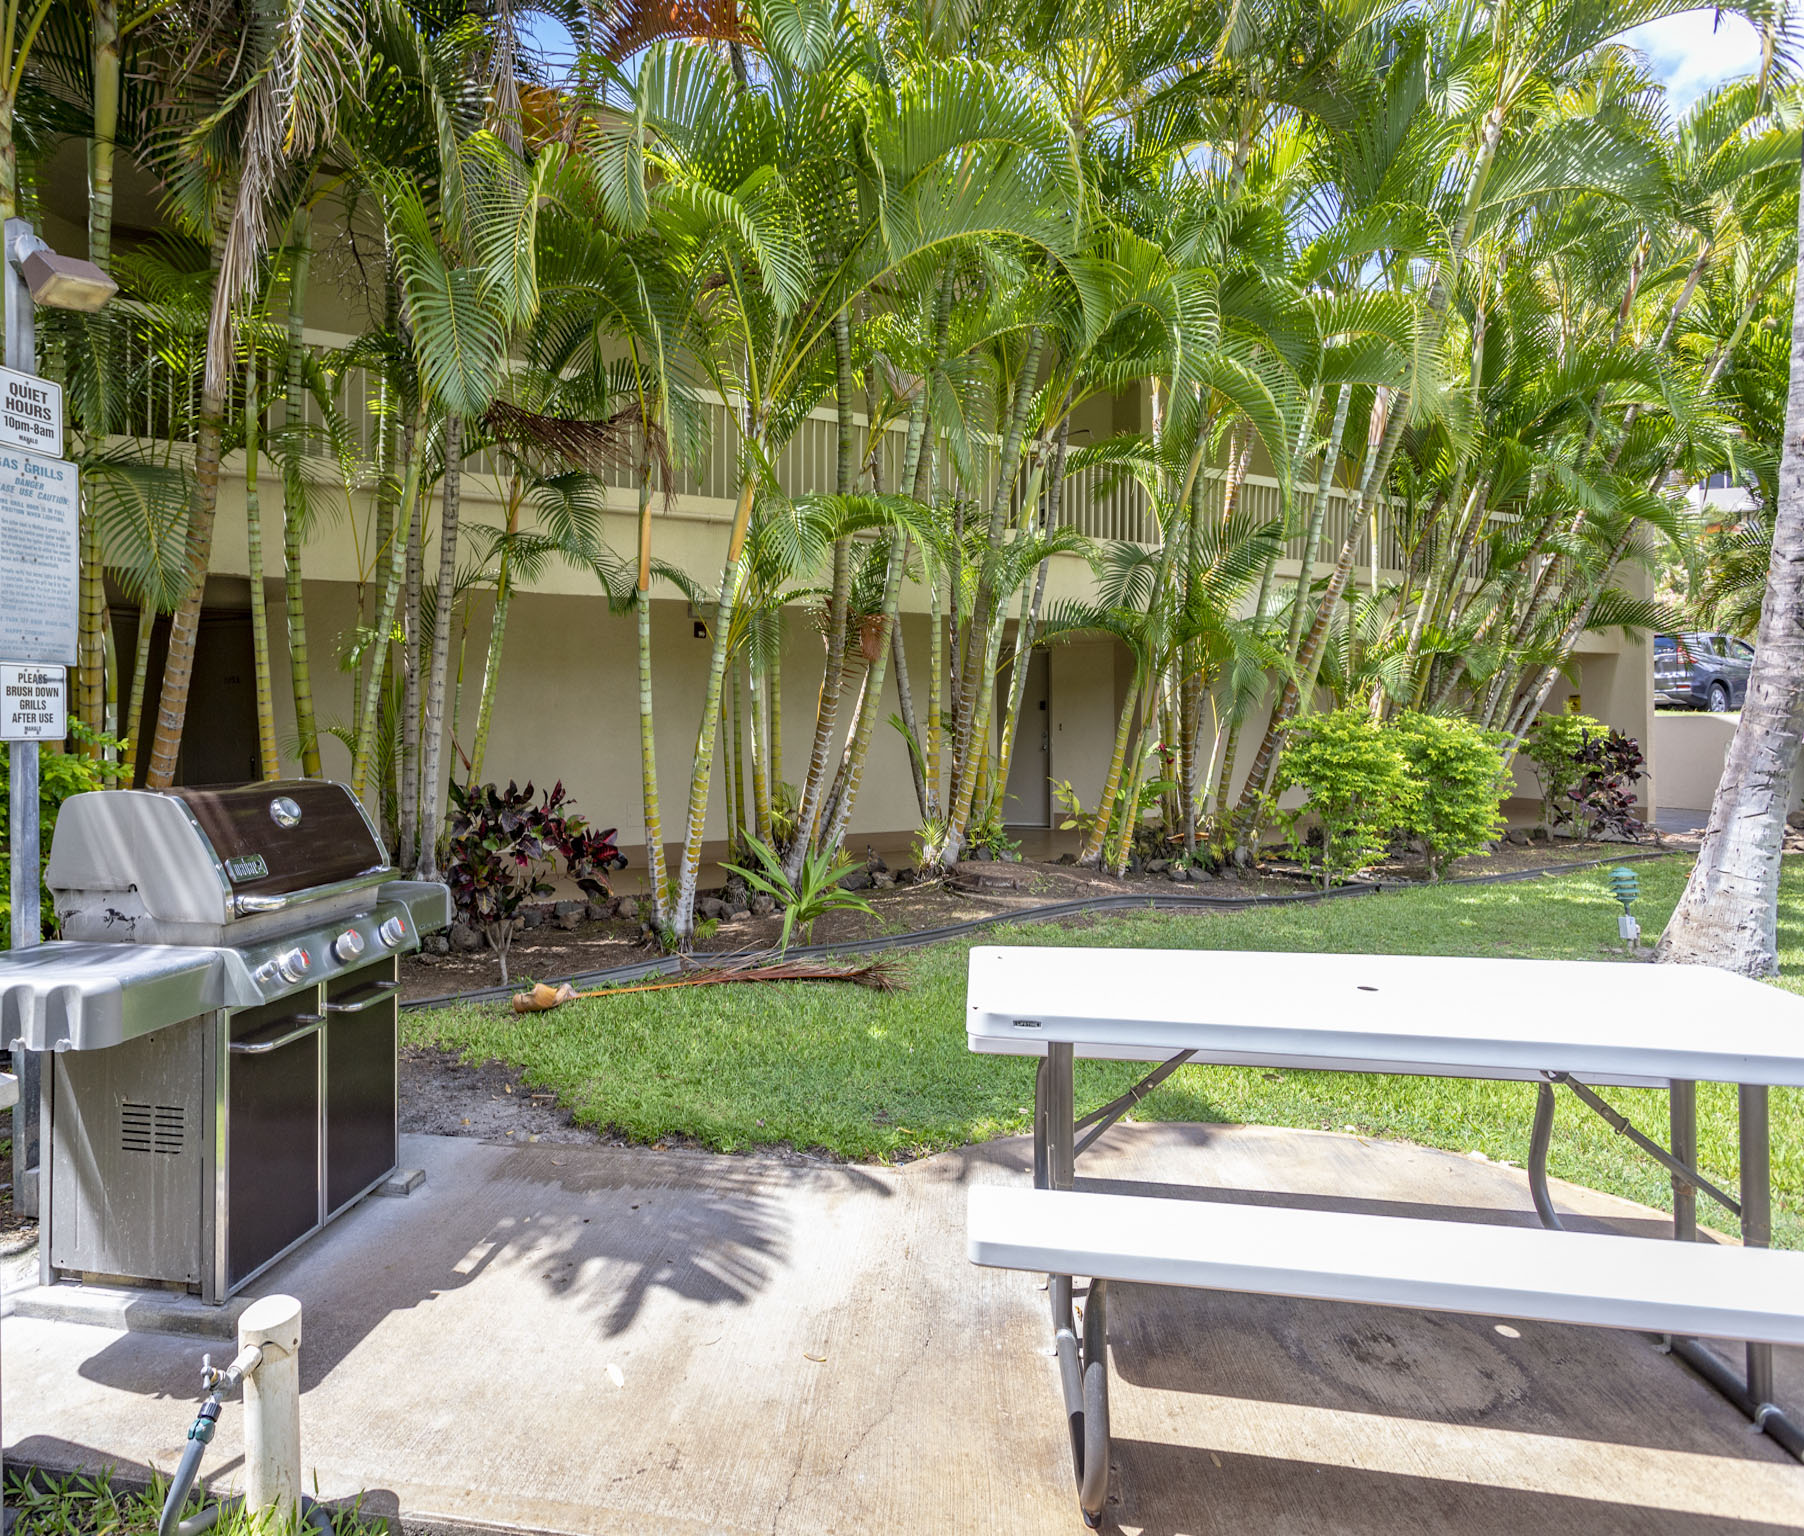 Guest-Use Grill & Picnic Areas